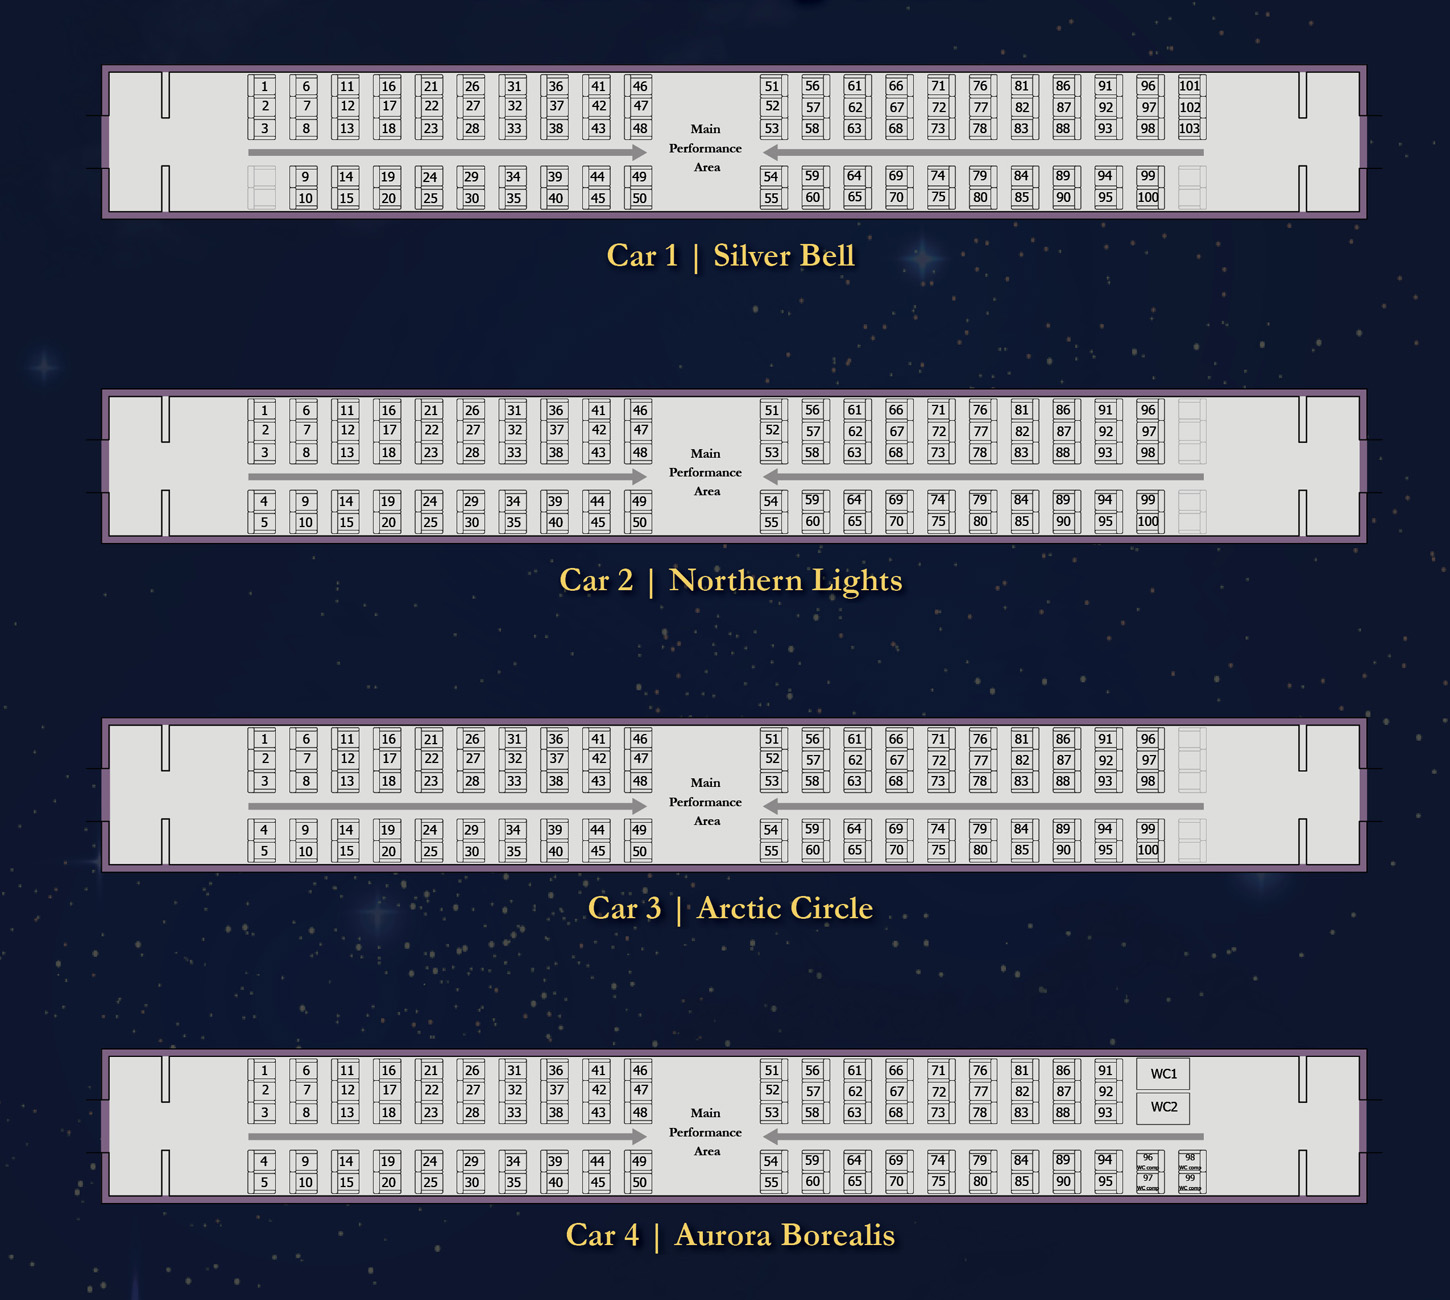 Polar Express French Seating Chart